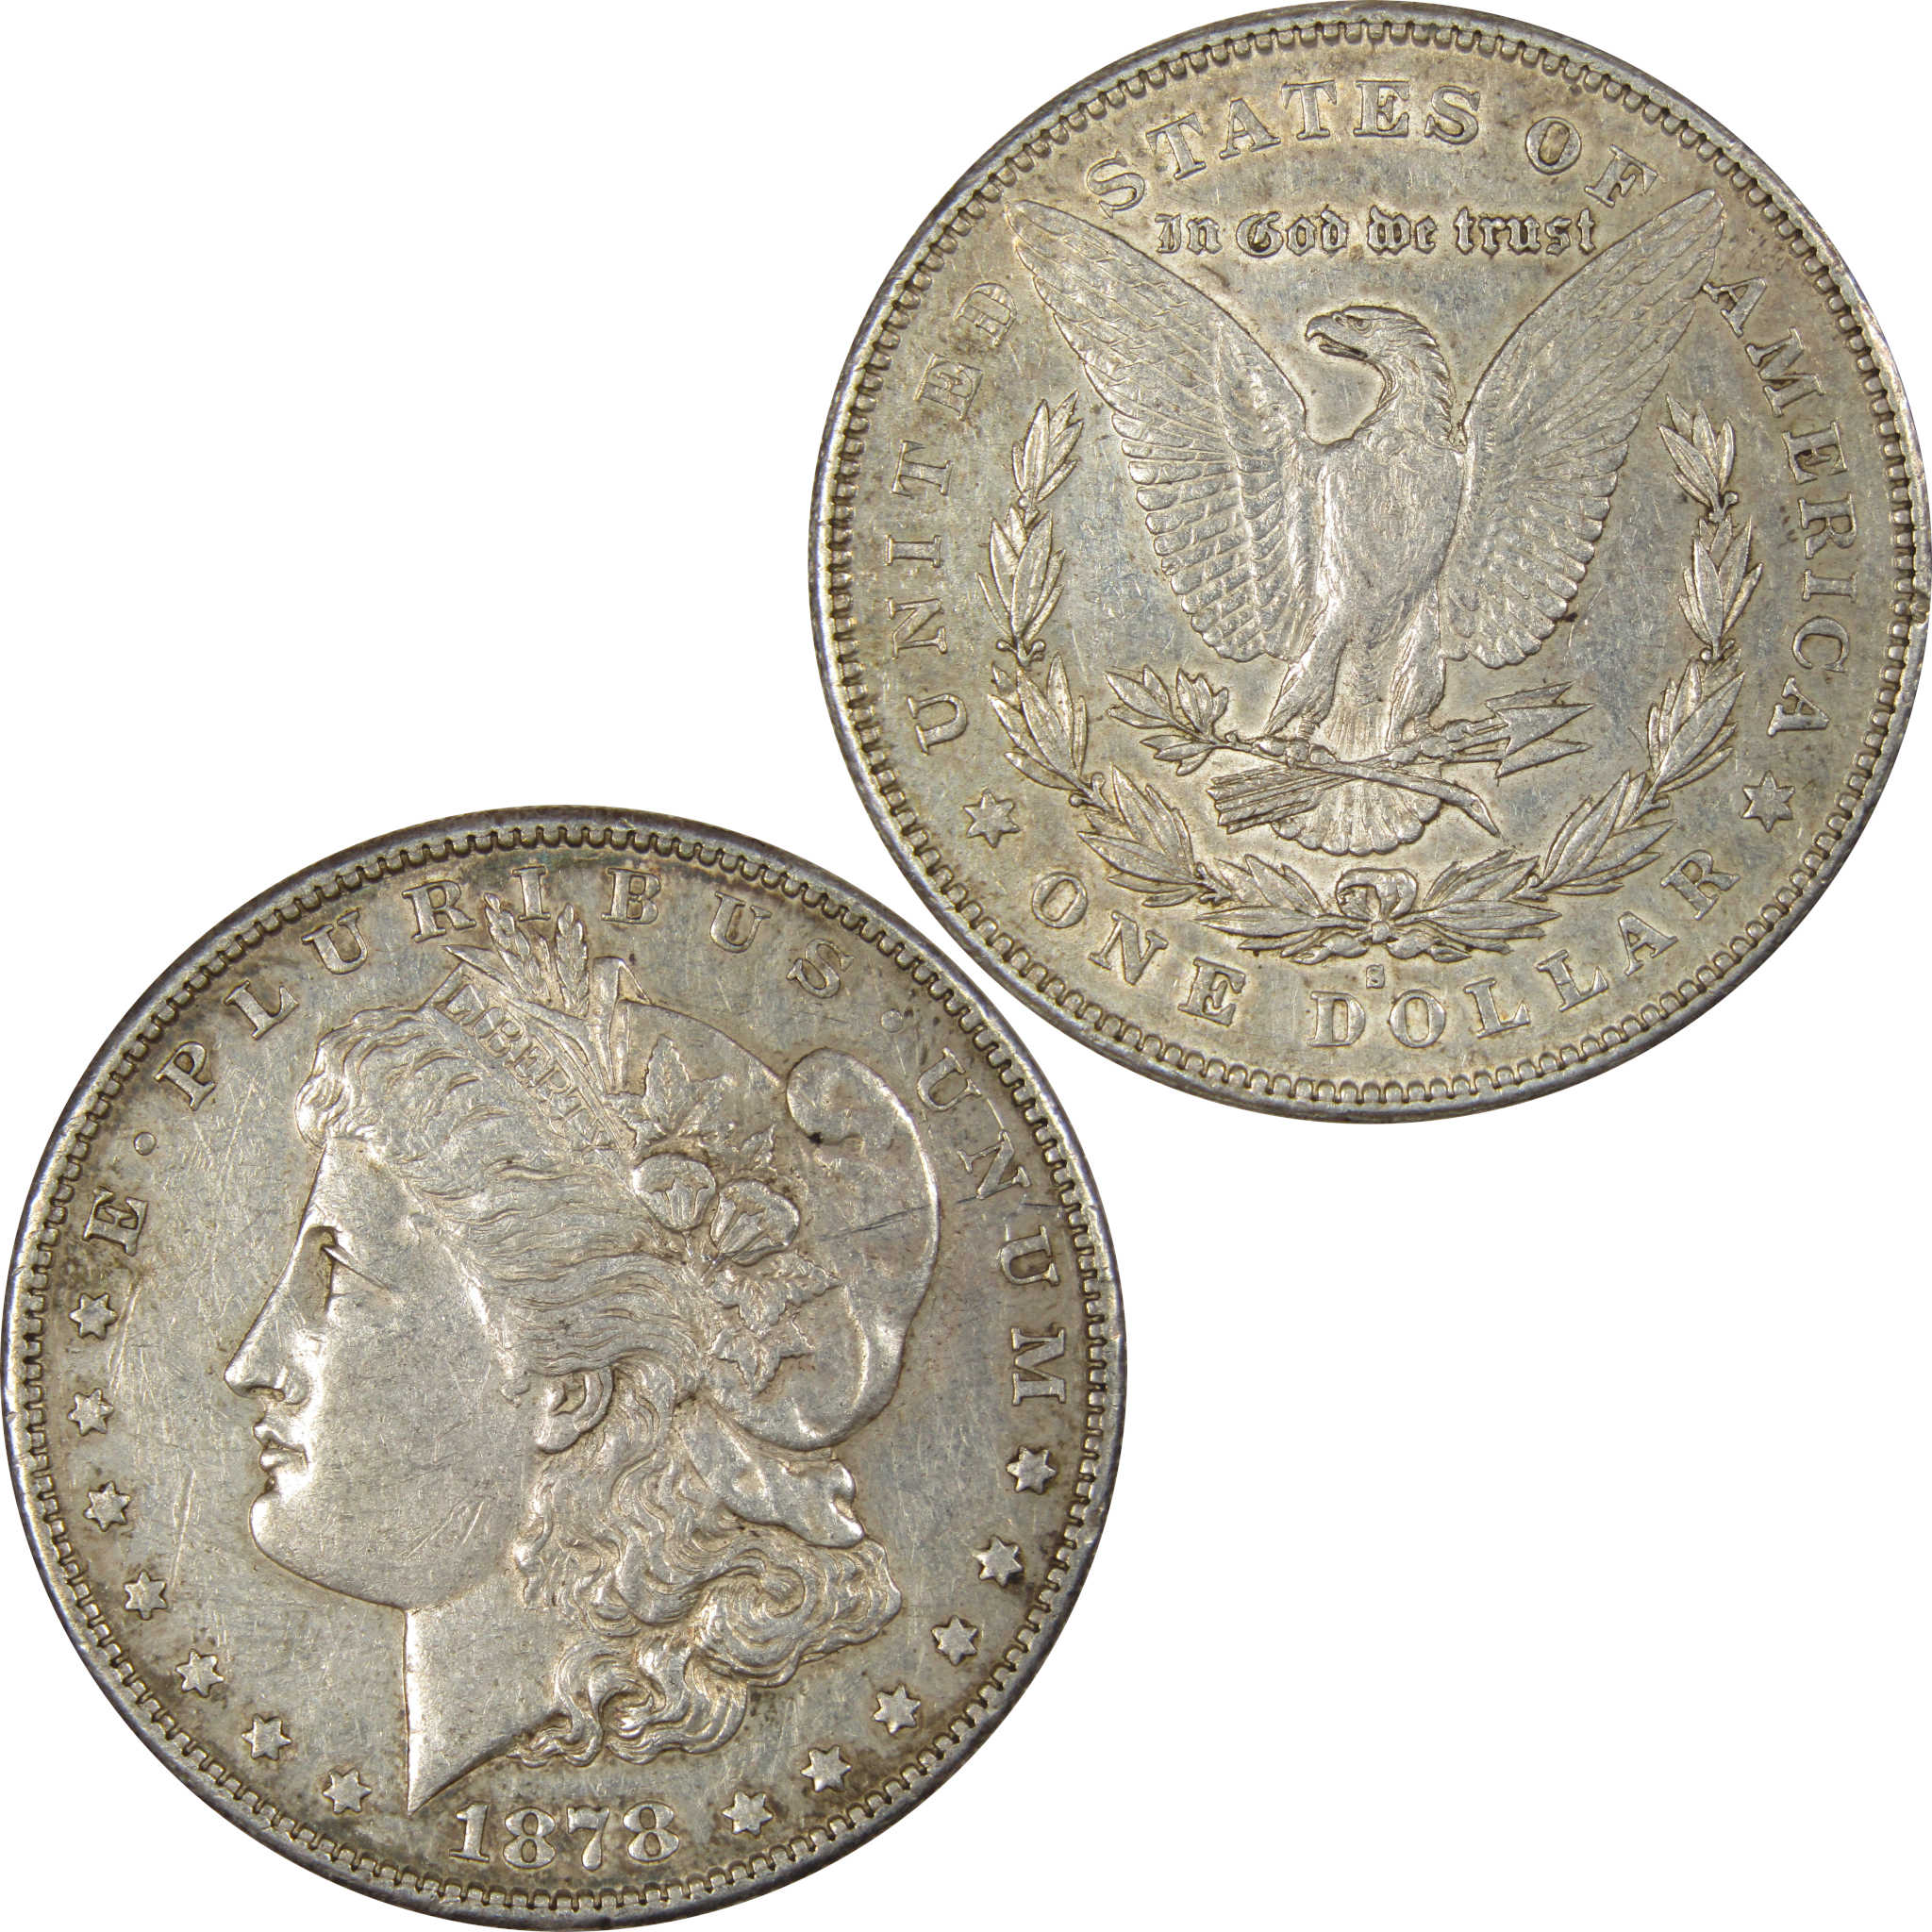 1878 S Morgan Dollar XF EF Extremely Fine 90% Silver SKU:IPC8295 - Morgan coin - Morgan silver dollar - Morgan silver dollar for sale - Profile Coins &amp; Collectibles